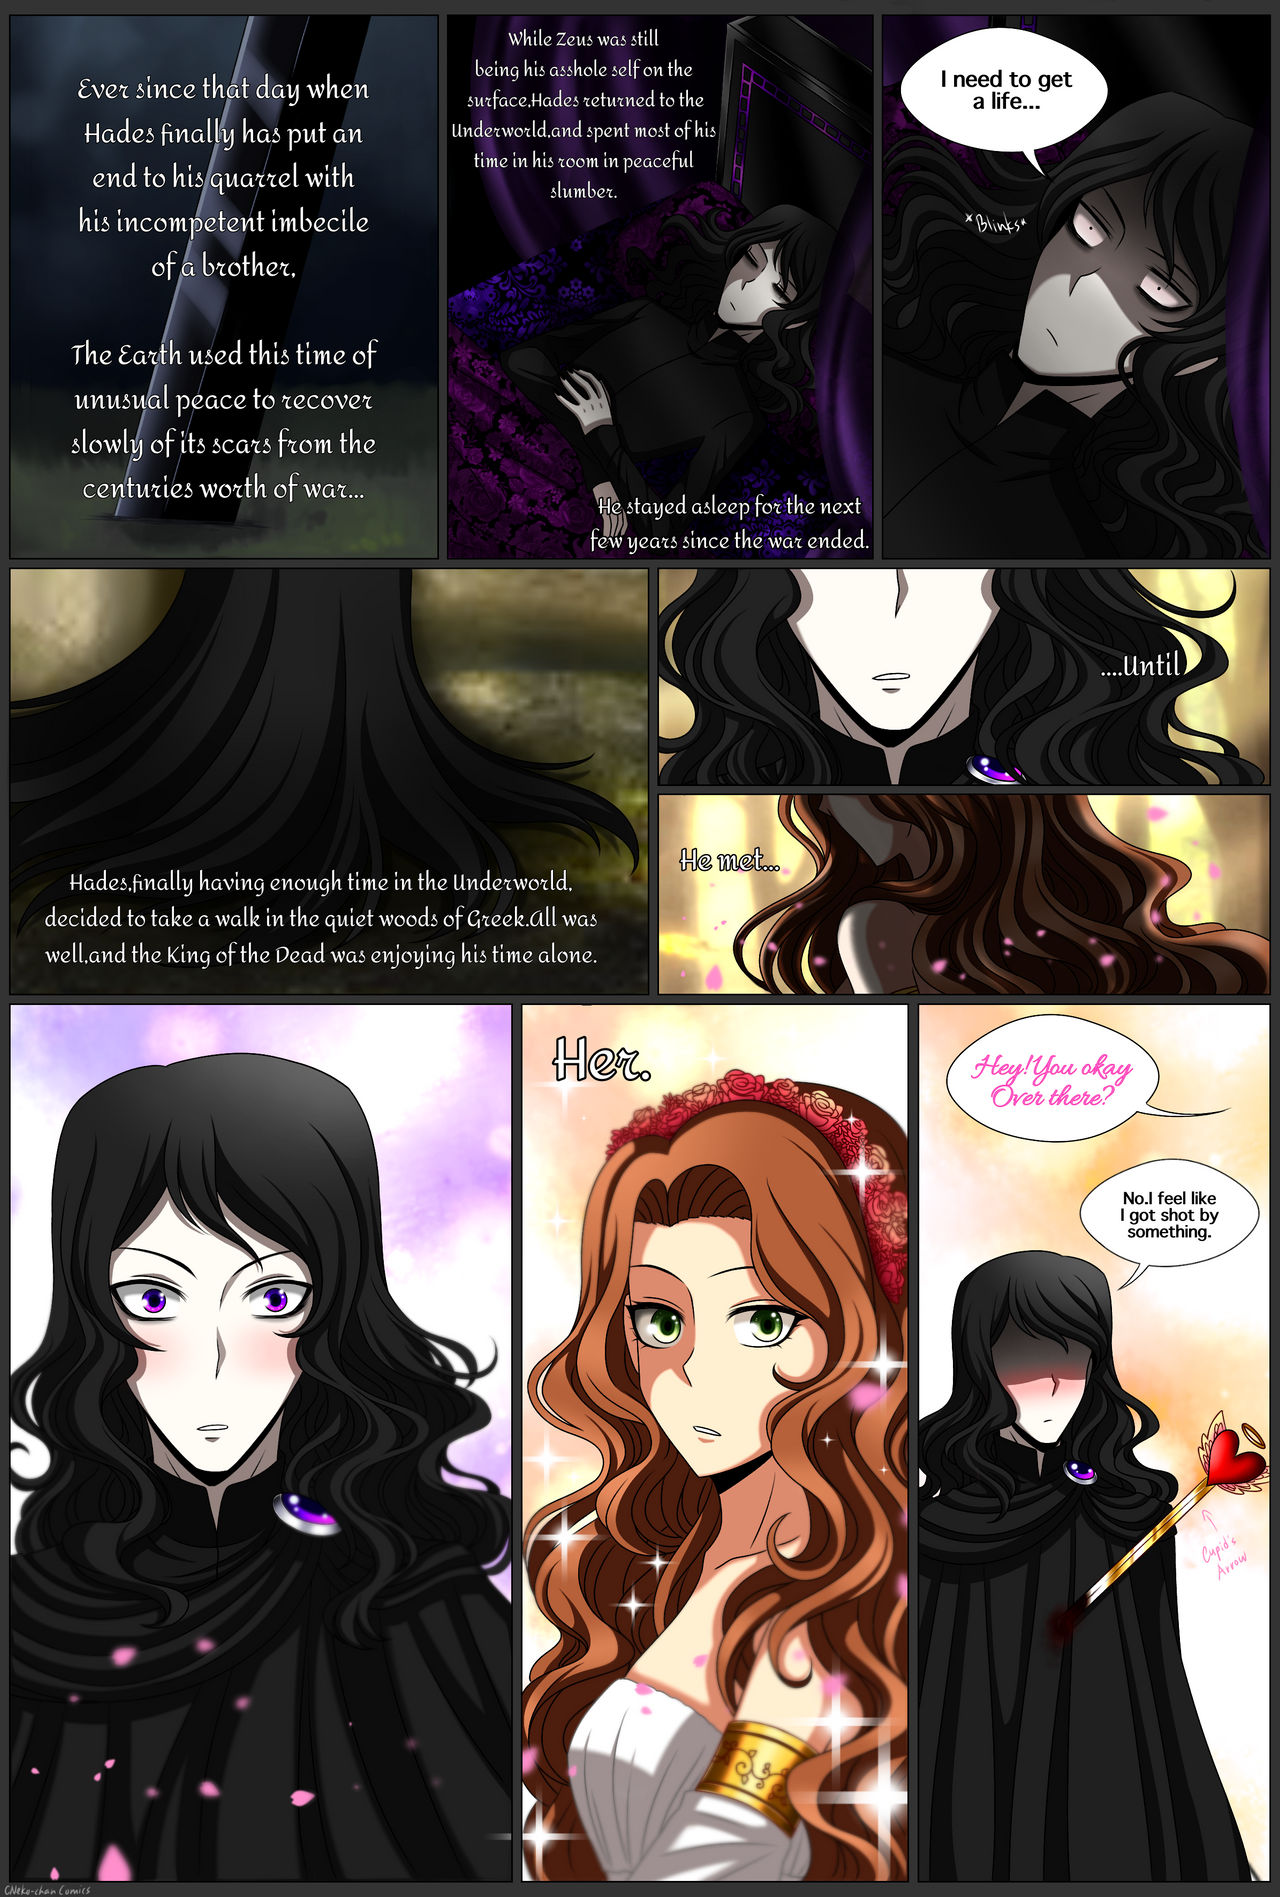 MAKARIA: Introducing Persephone [Page 5] by CNeko-chan on DeviantArt